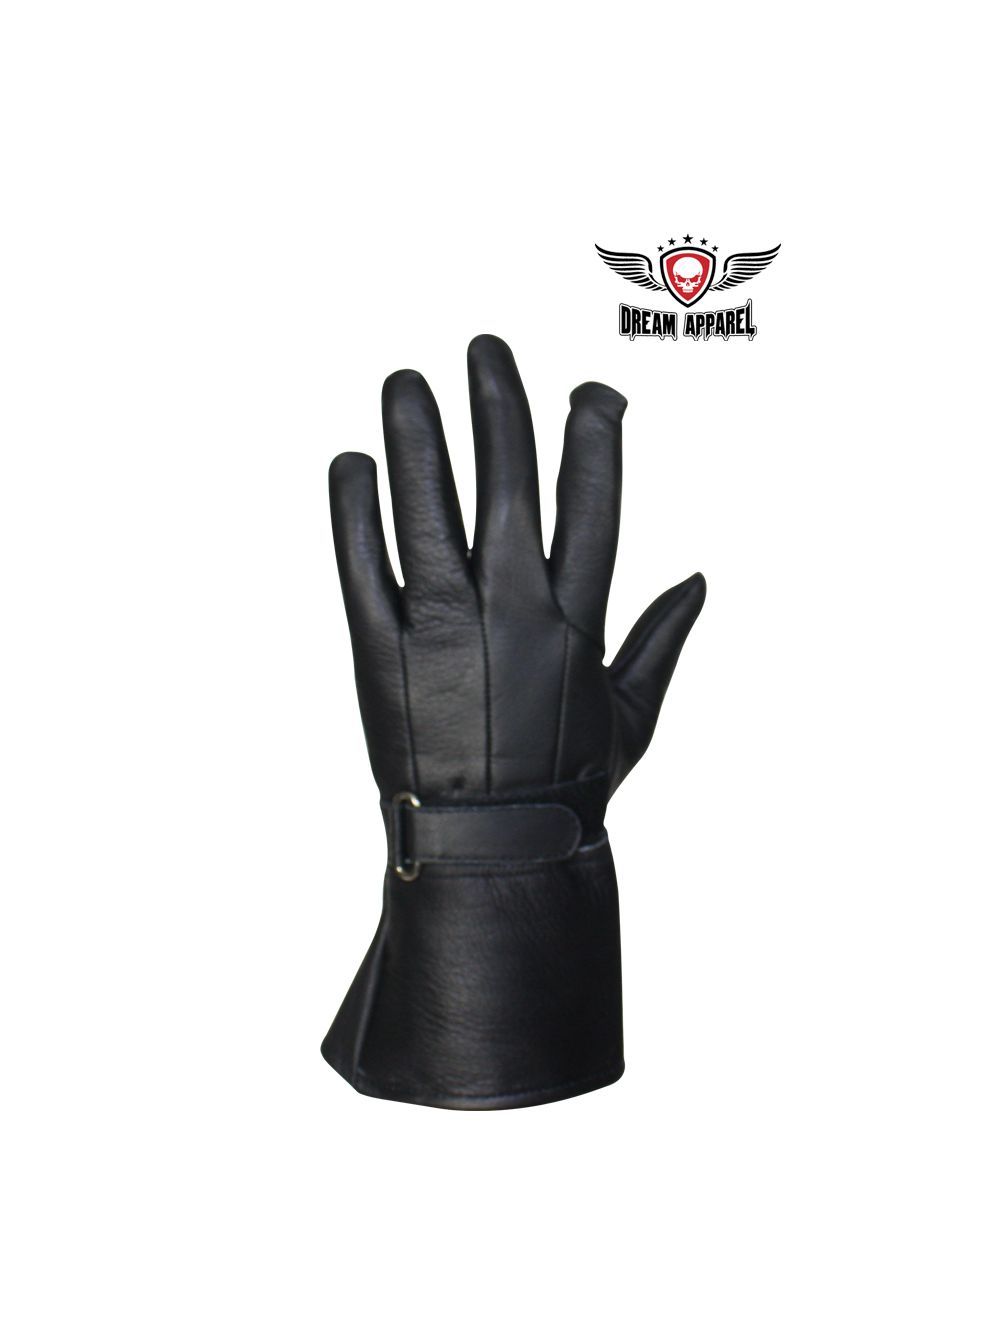 ADM Deer Skin Black Leather Motorbike with Rubber Knuckle Protection Gloves 9018